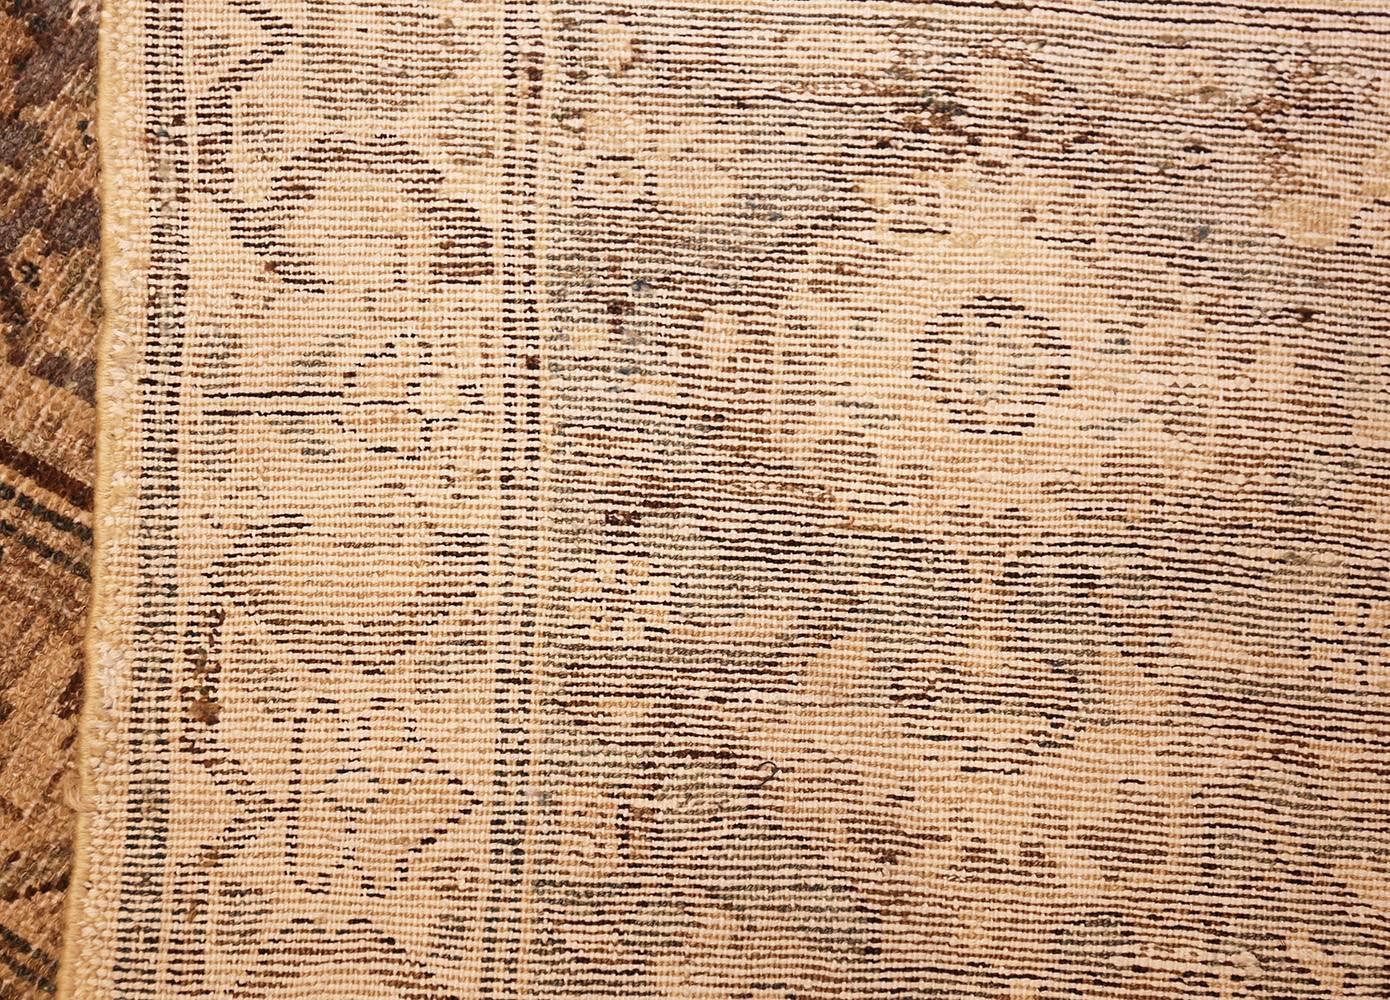 Oversized Antique Persian Malayer Carpet, Country of Origin: Persia, Circa date: 1920. Size: 13 ft 6 in x 25 ft 9 in (4.11 m x 7.85 m).